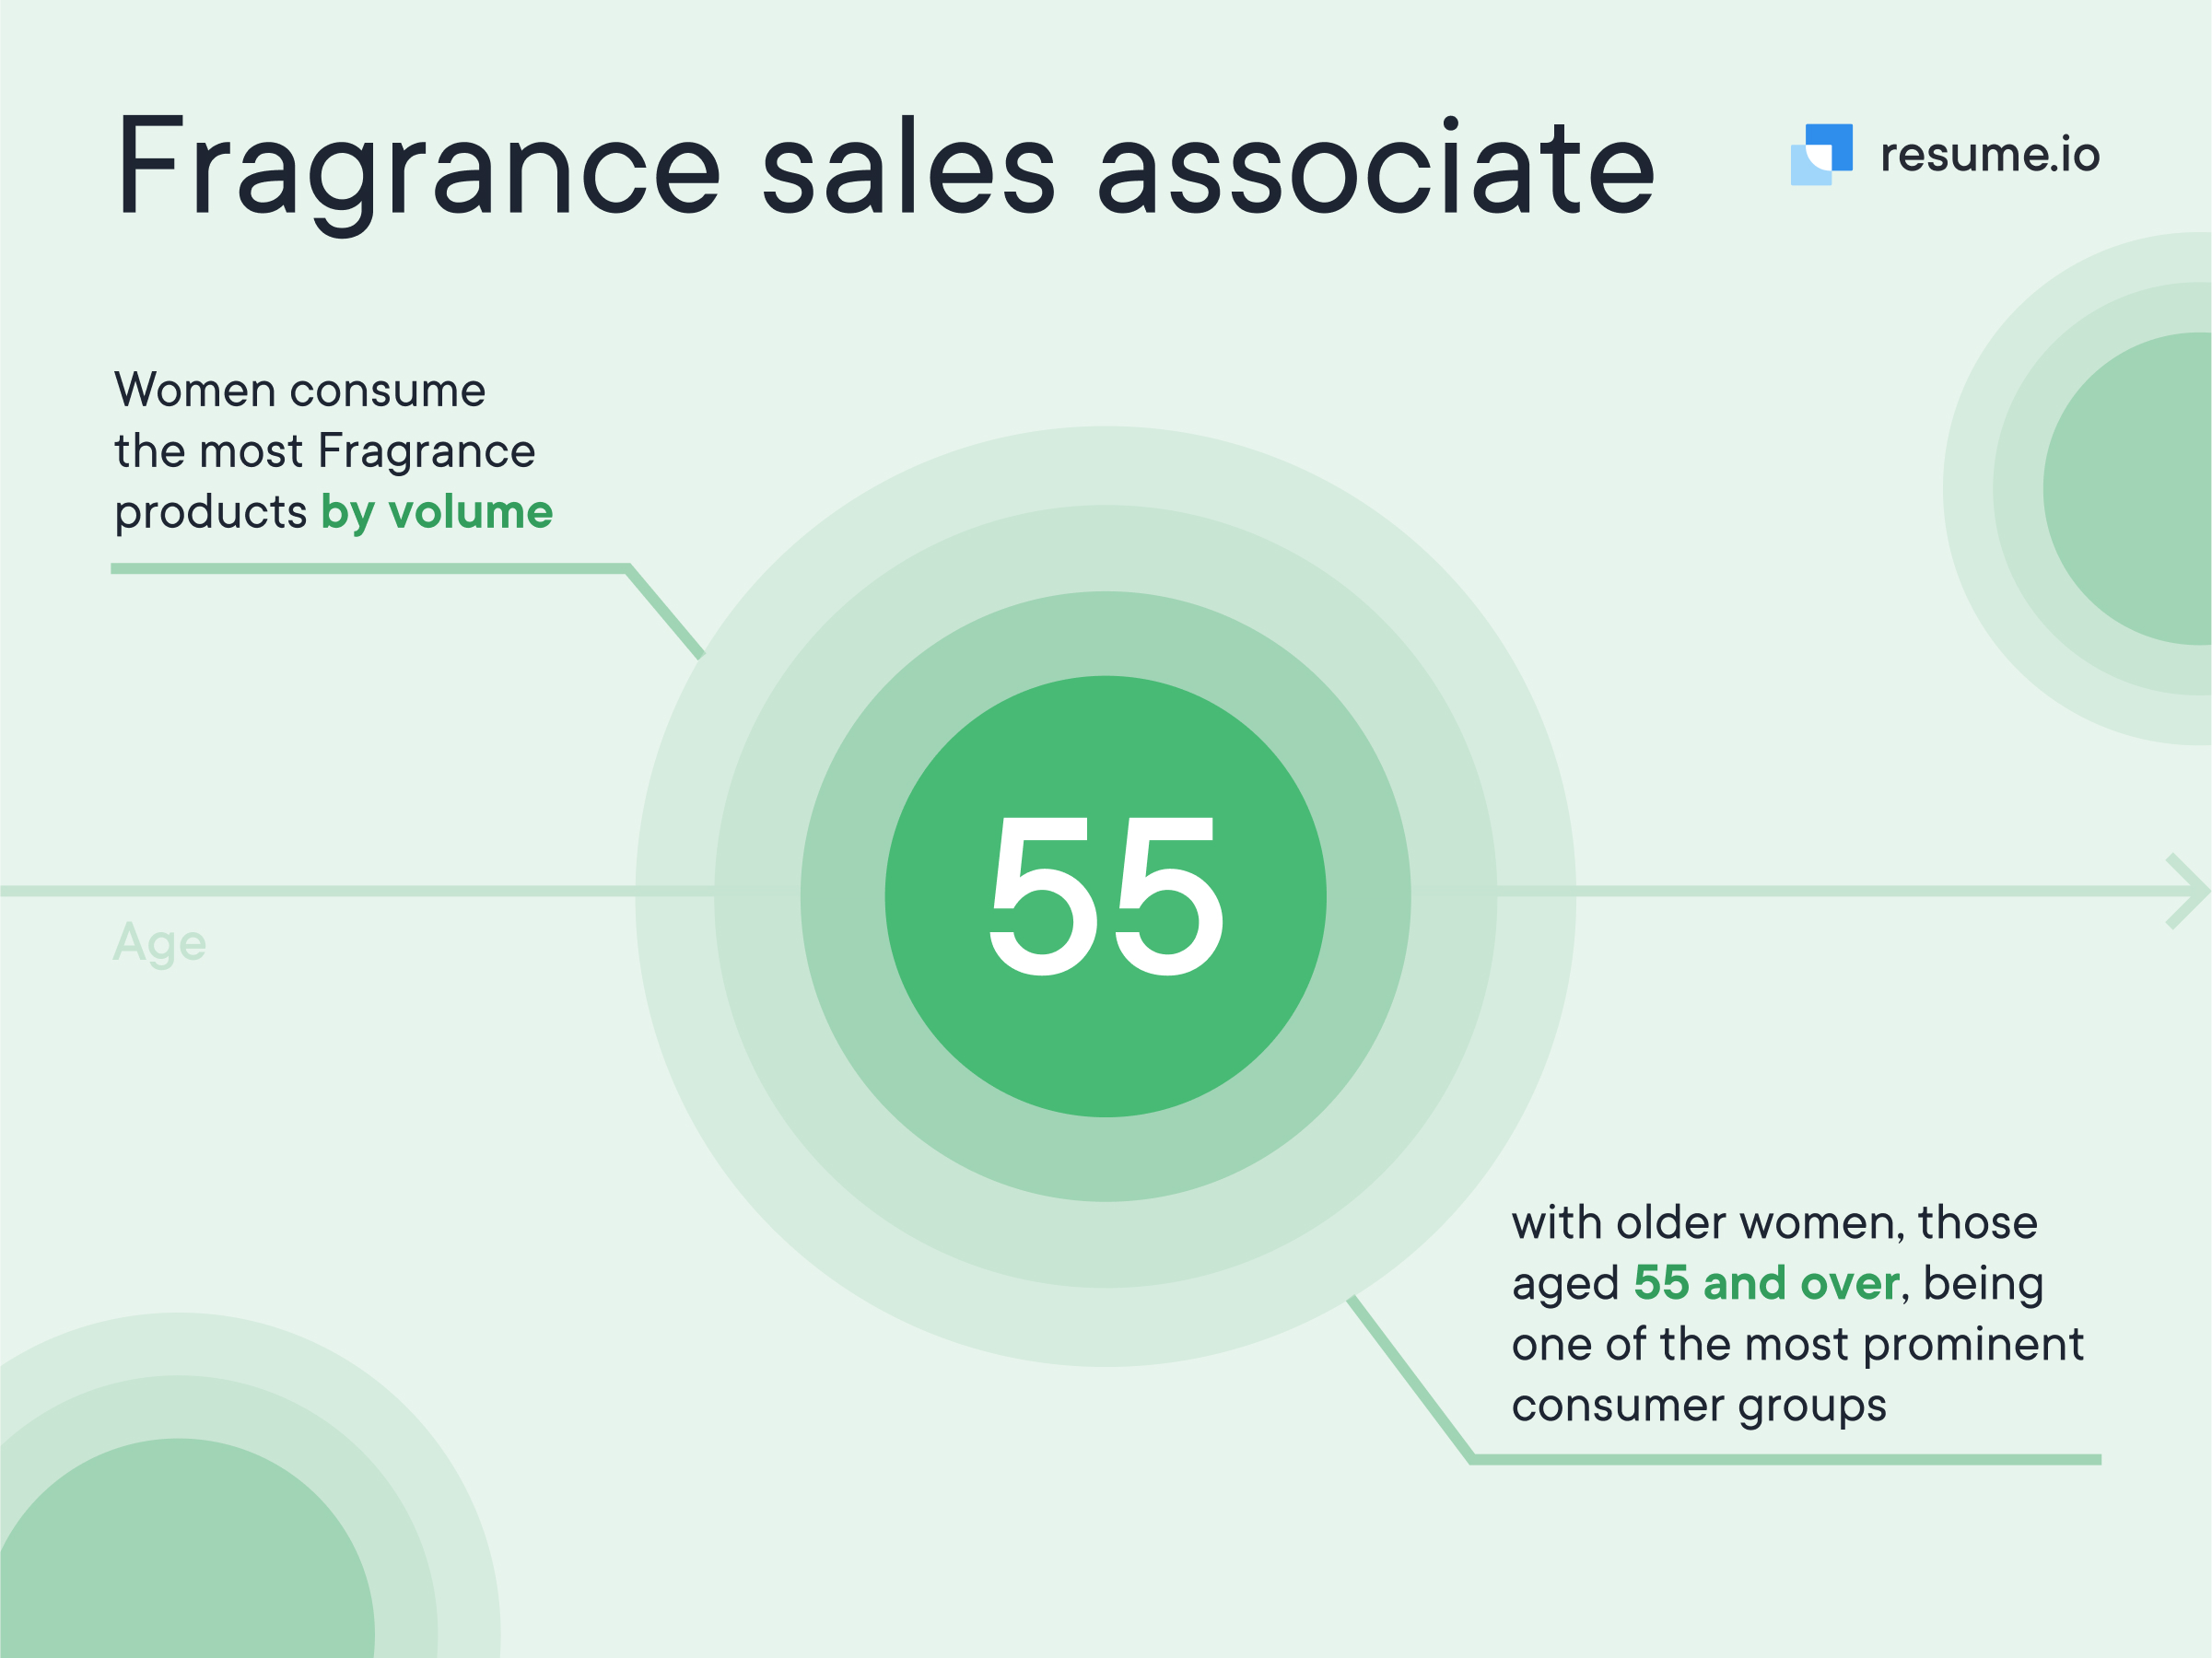 Percentage about the most prominent consumer group in Fragrance products